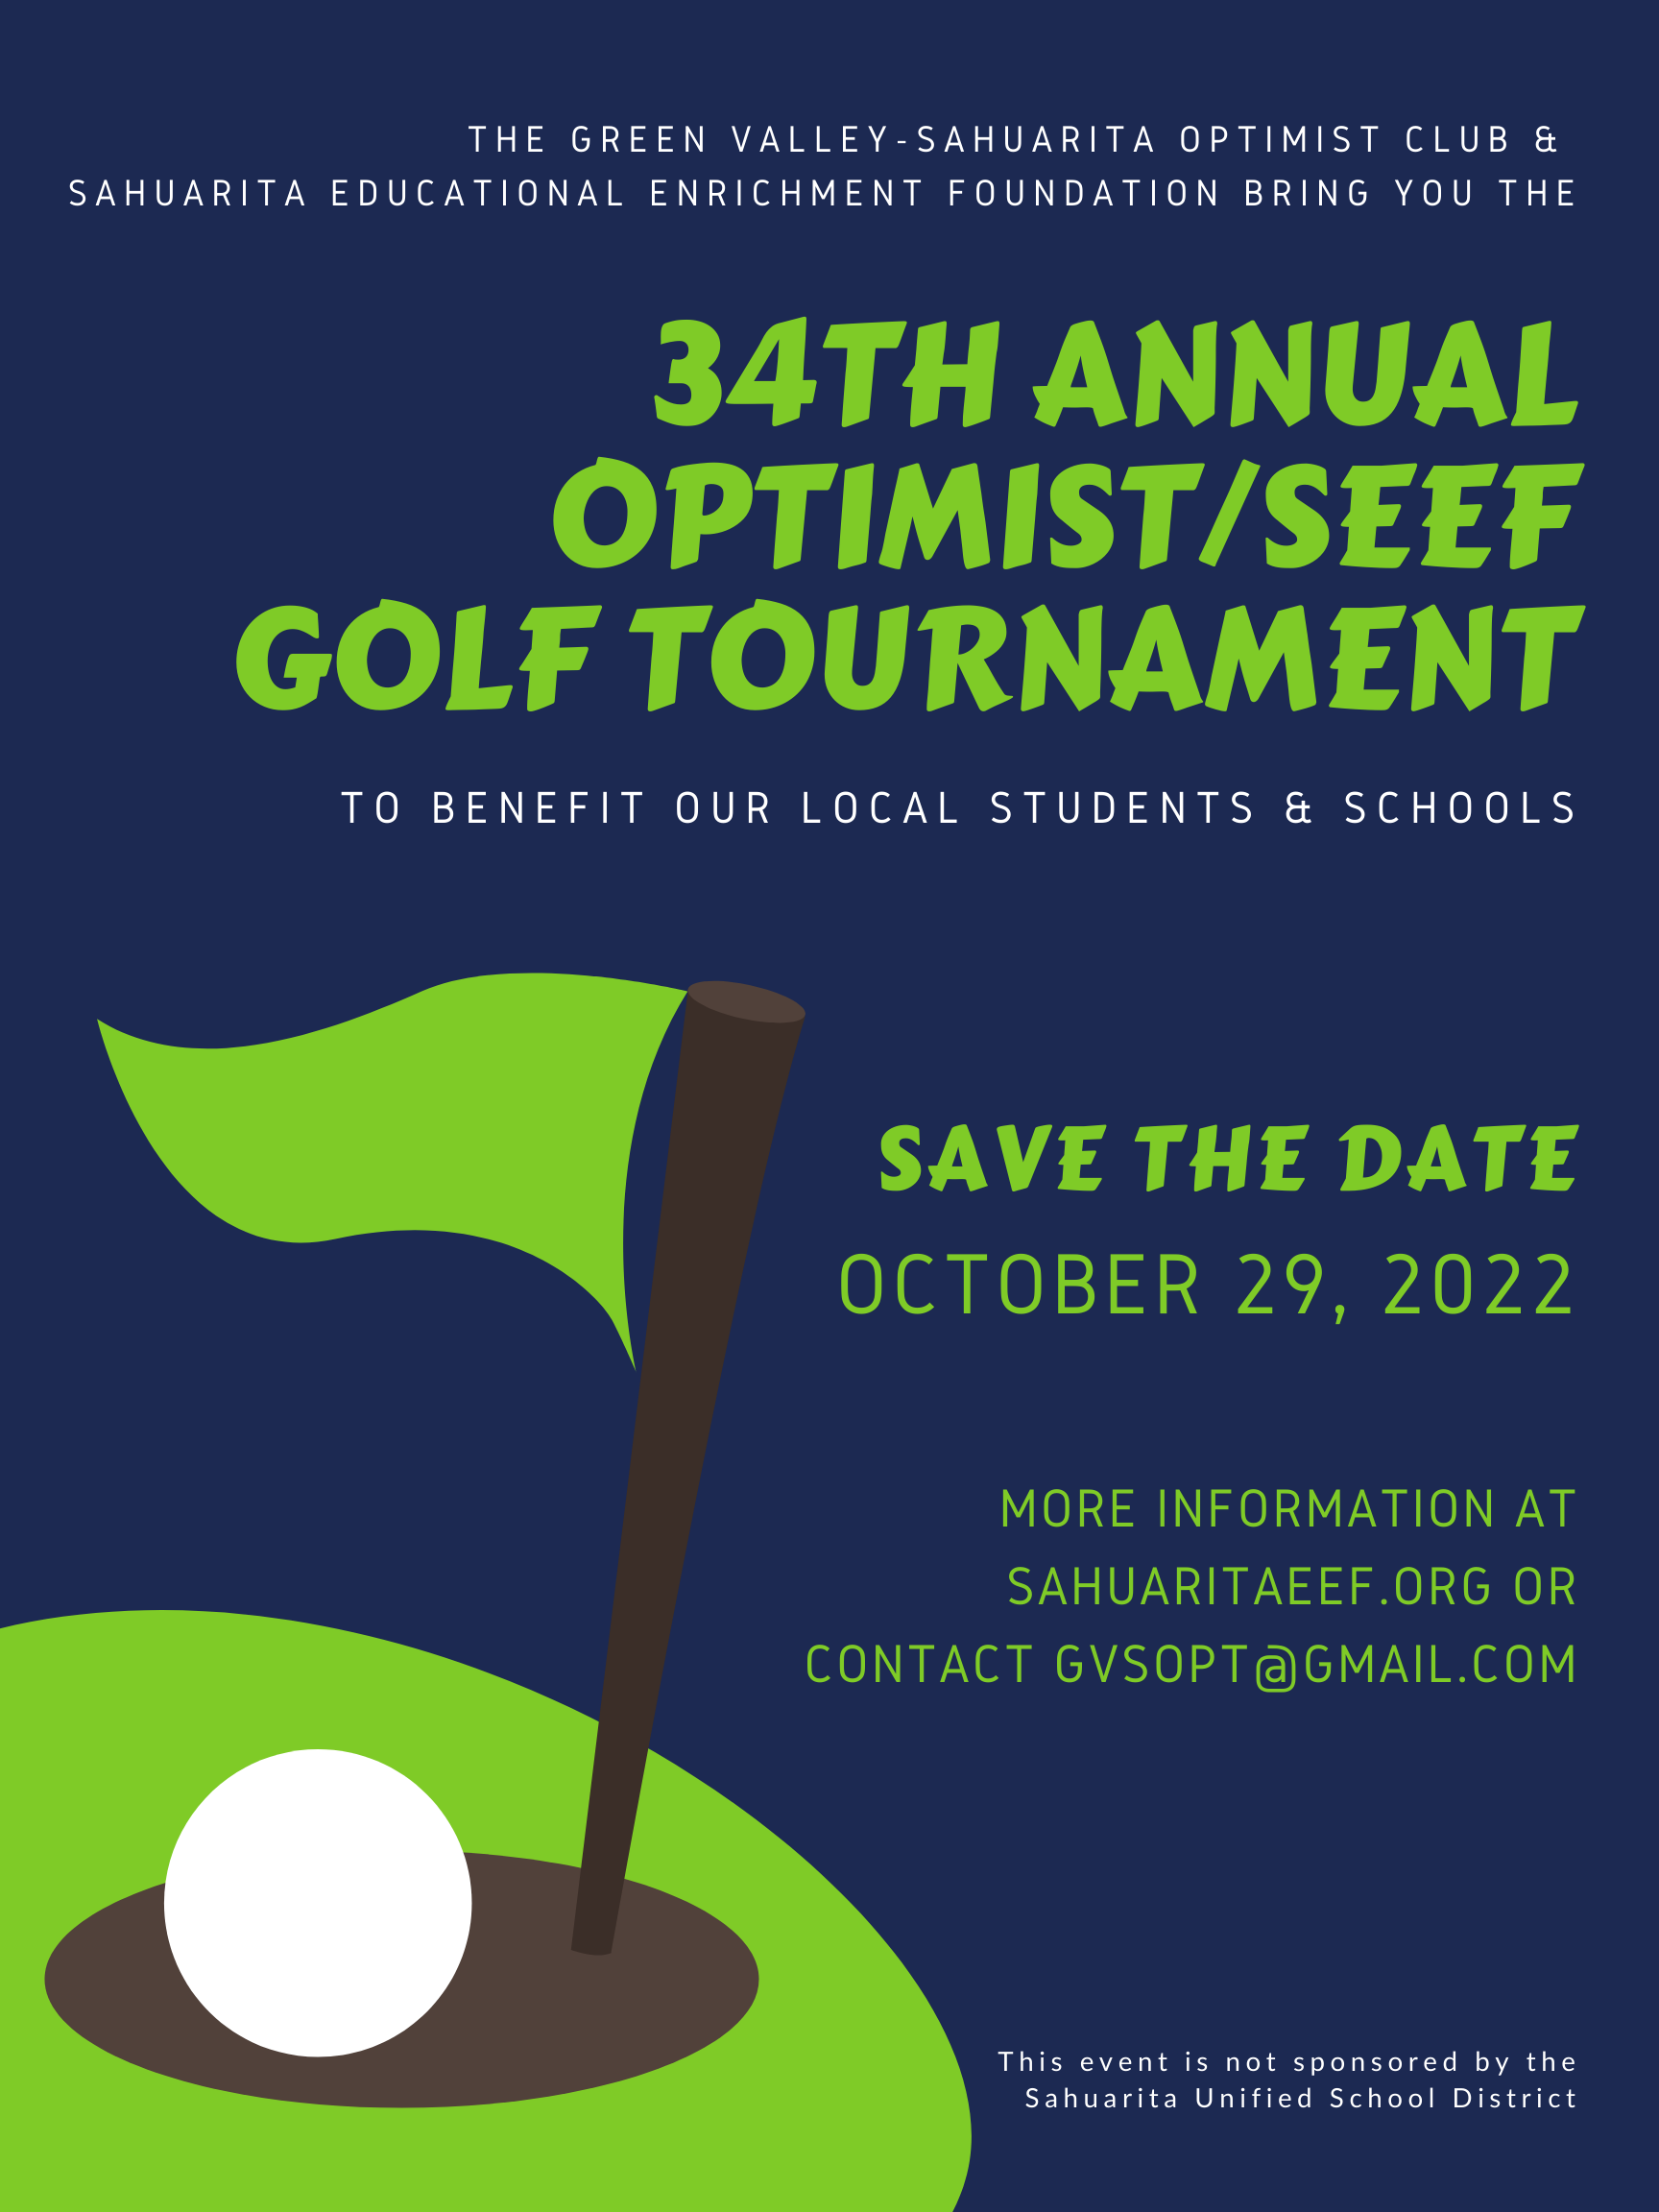 save the date for october 29th, 2022 for the 34th annual optimist seef golf tournament